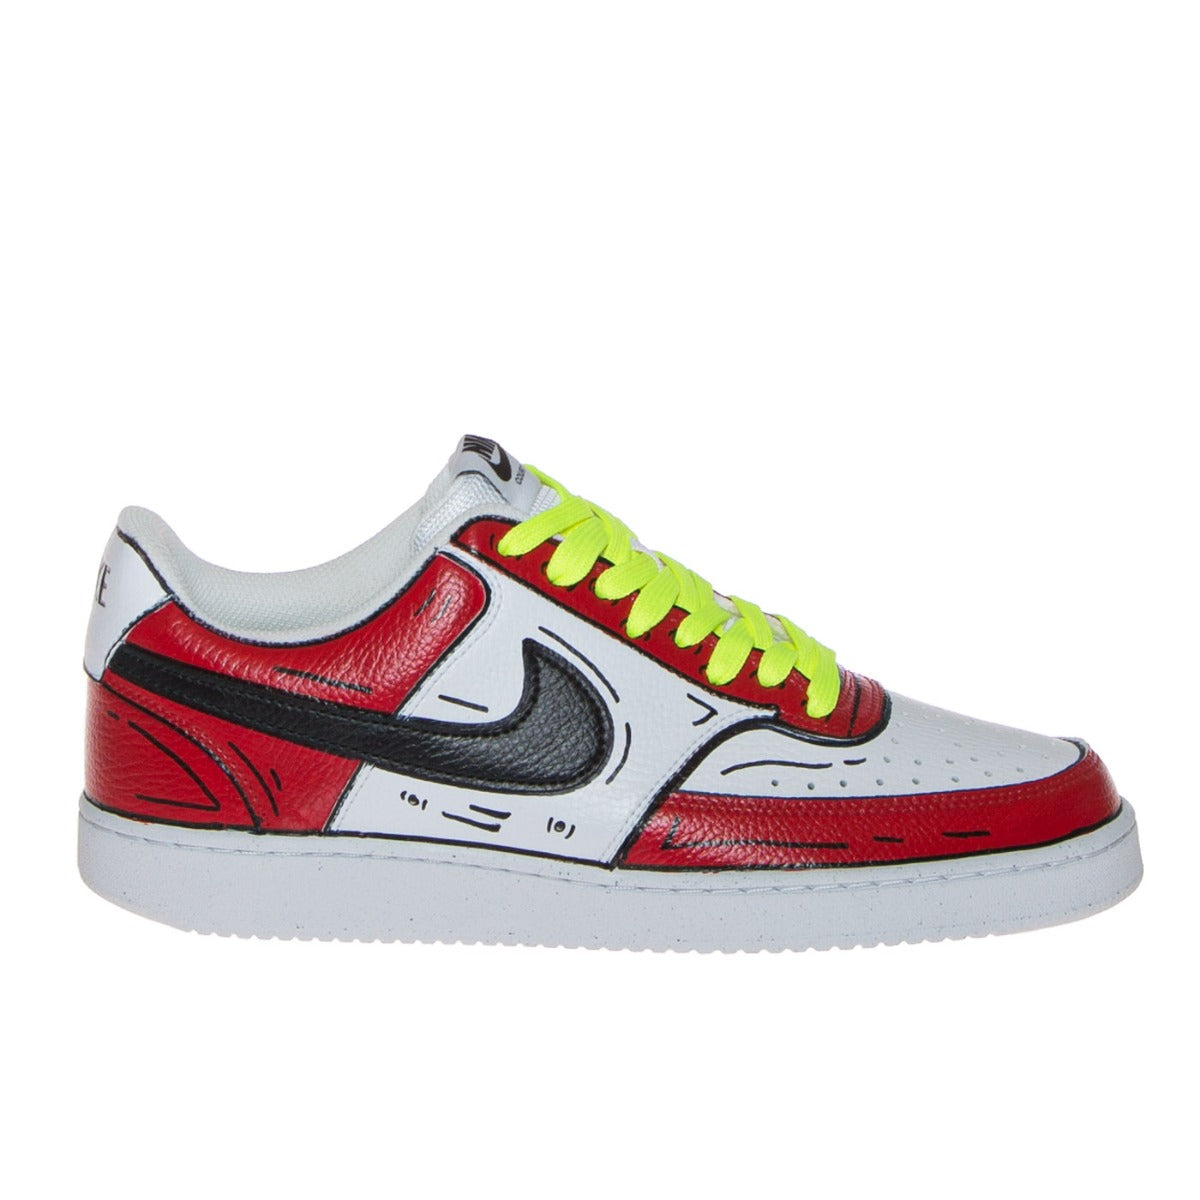 nike-court-vision-low-customized-sneakers-uomo-nv02-rosso